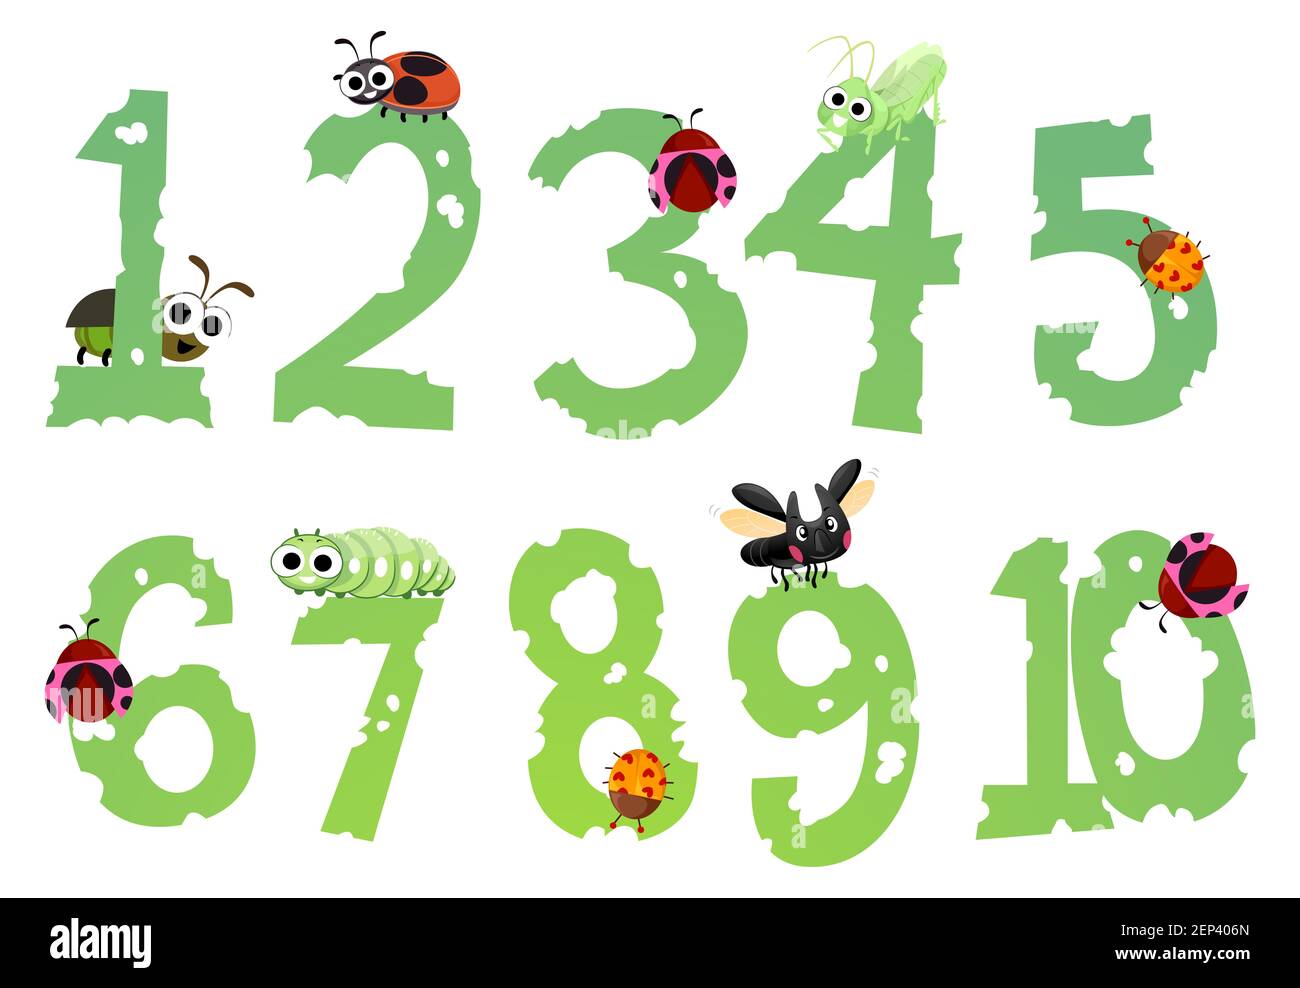 Illustration of Bugs From Lady Bug, Grasshopper, Beetle on Leaves Shaped as Numbers from One to Ten Stock Photo